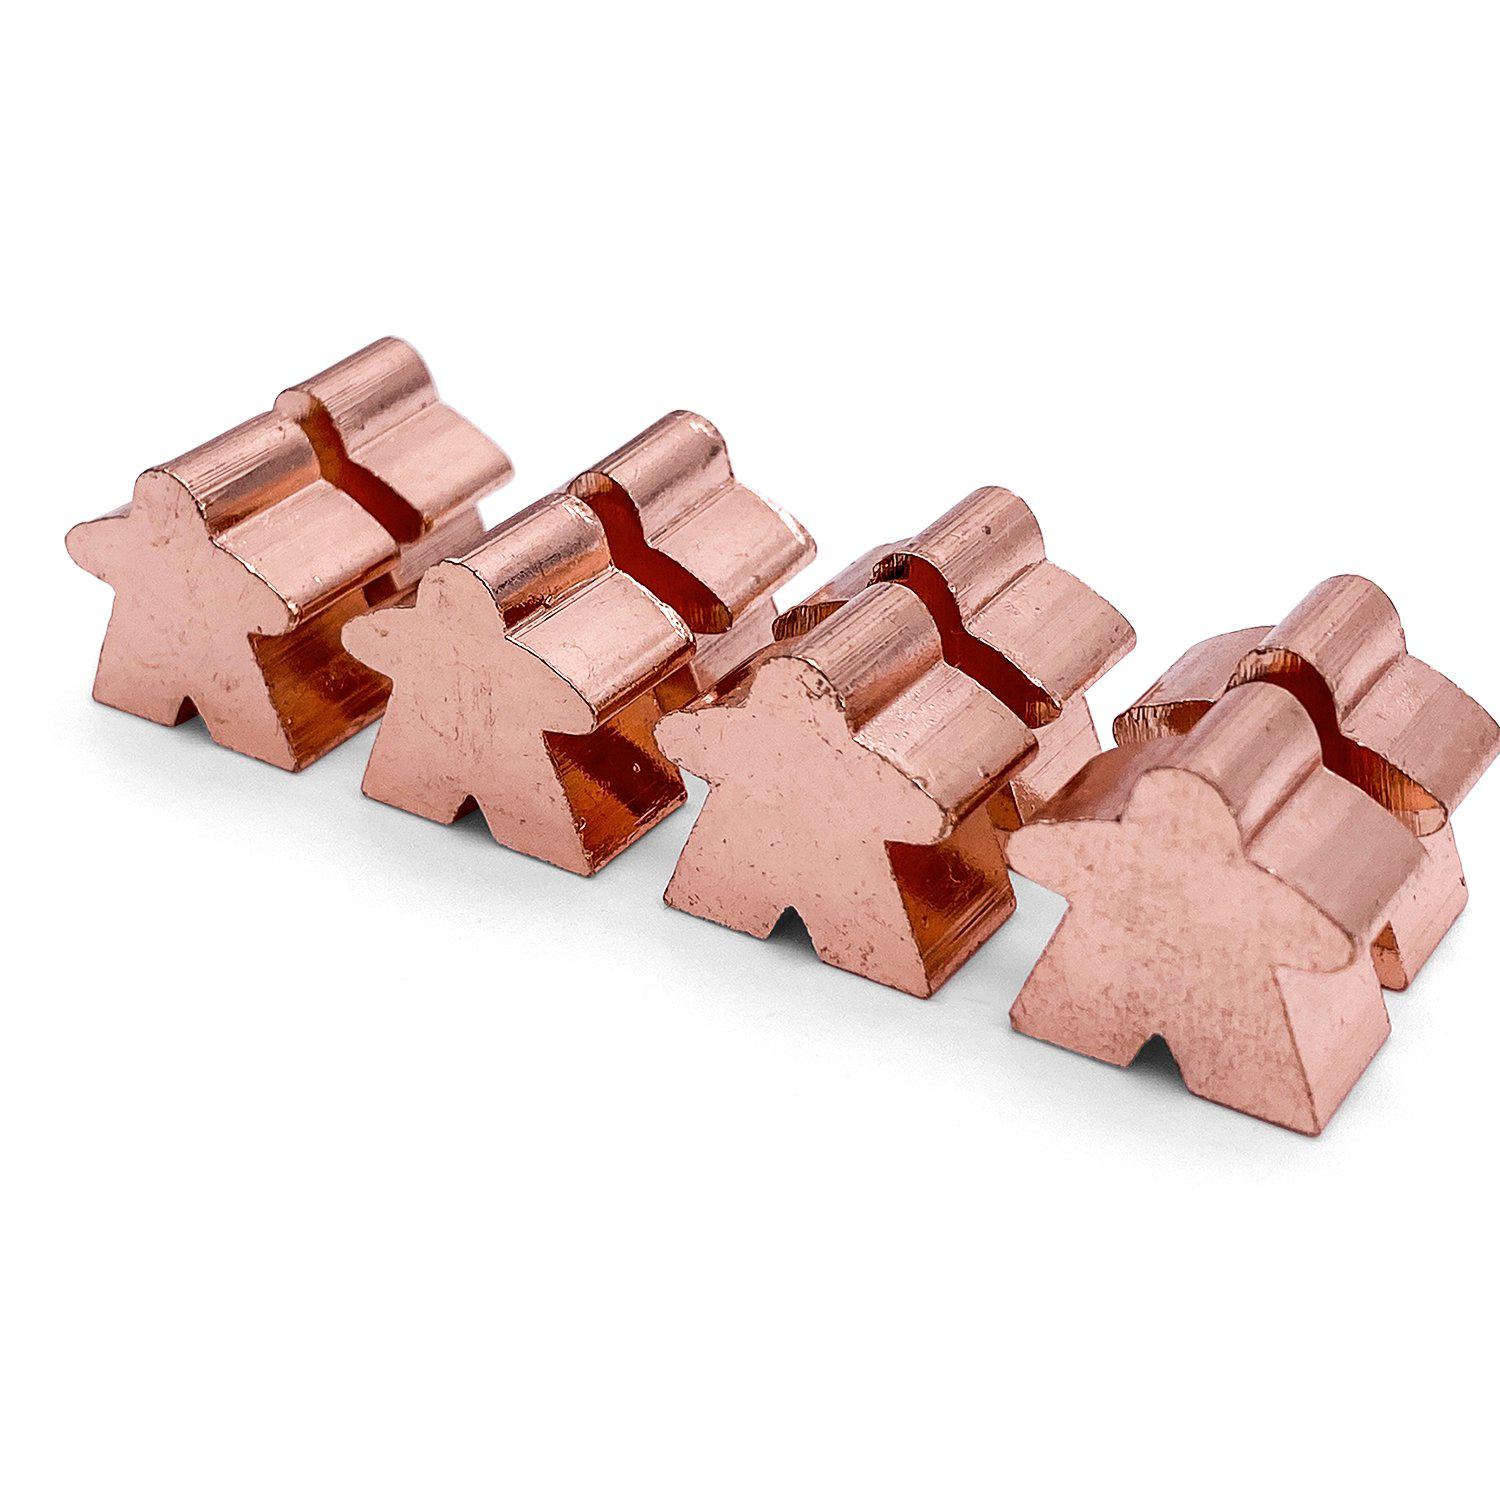 8 Pack of Shiny Copper Metal Meeples by Norse Foundry